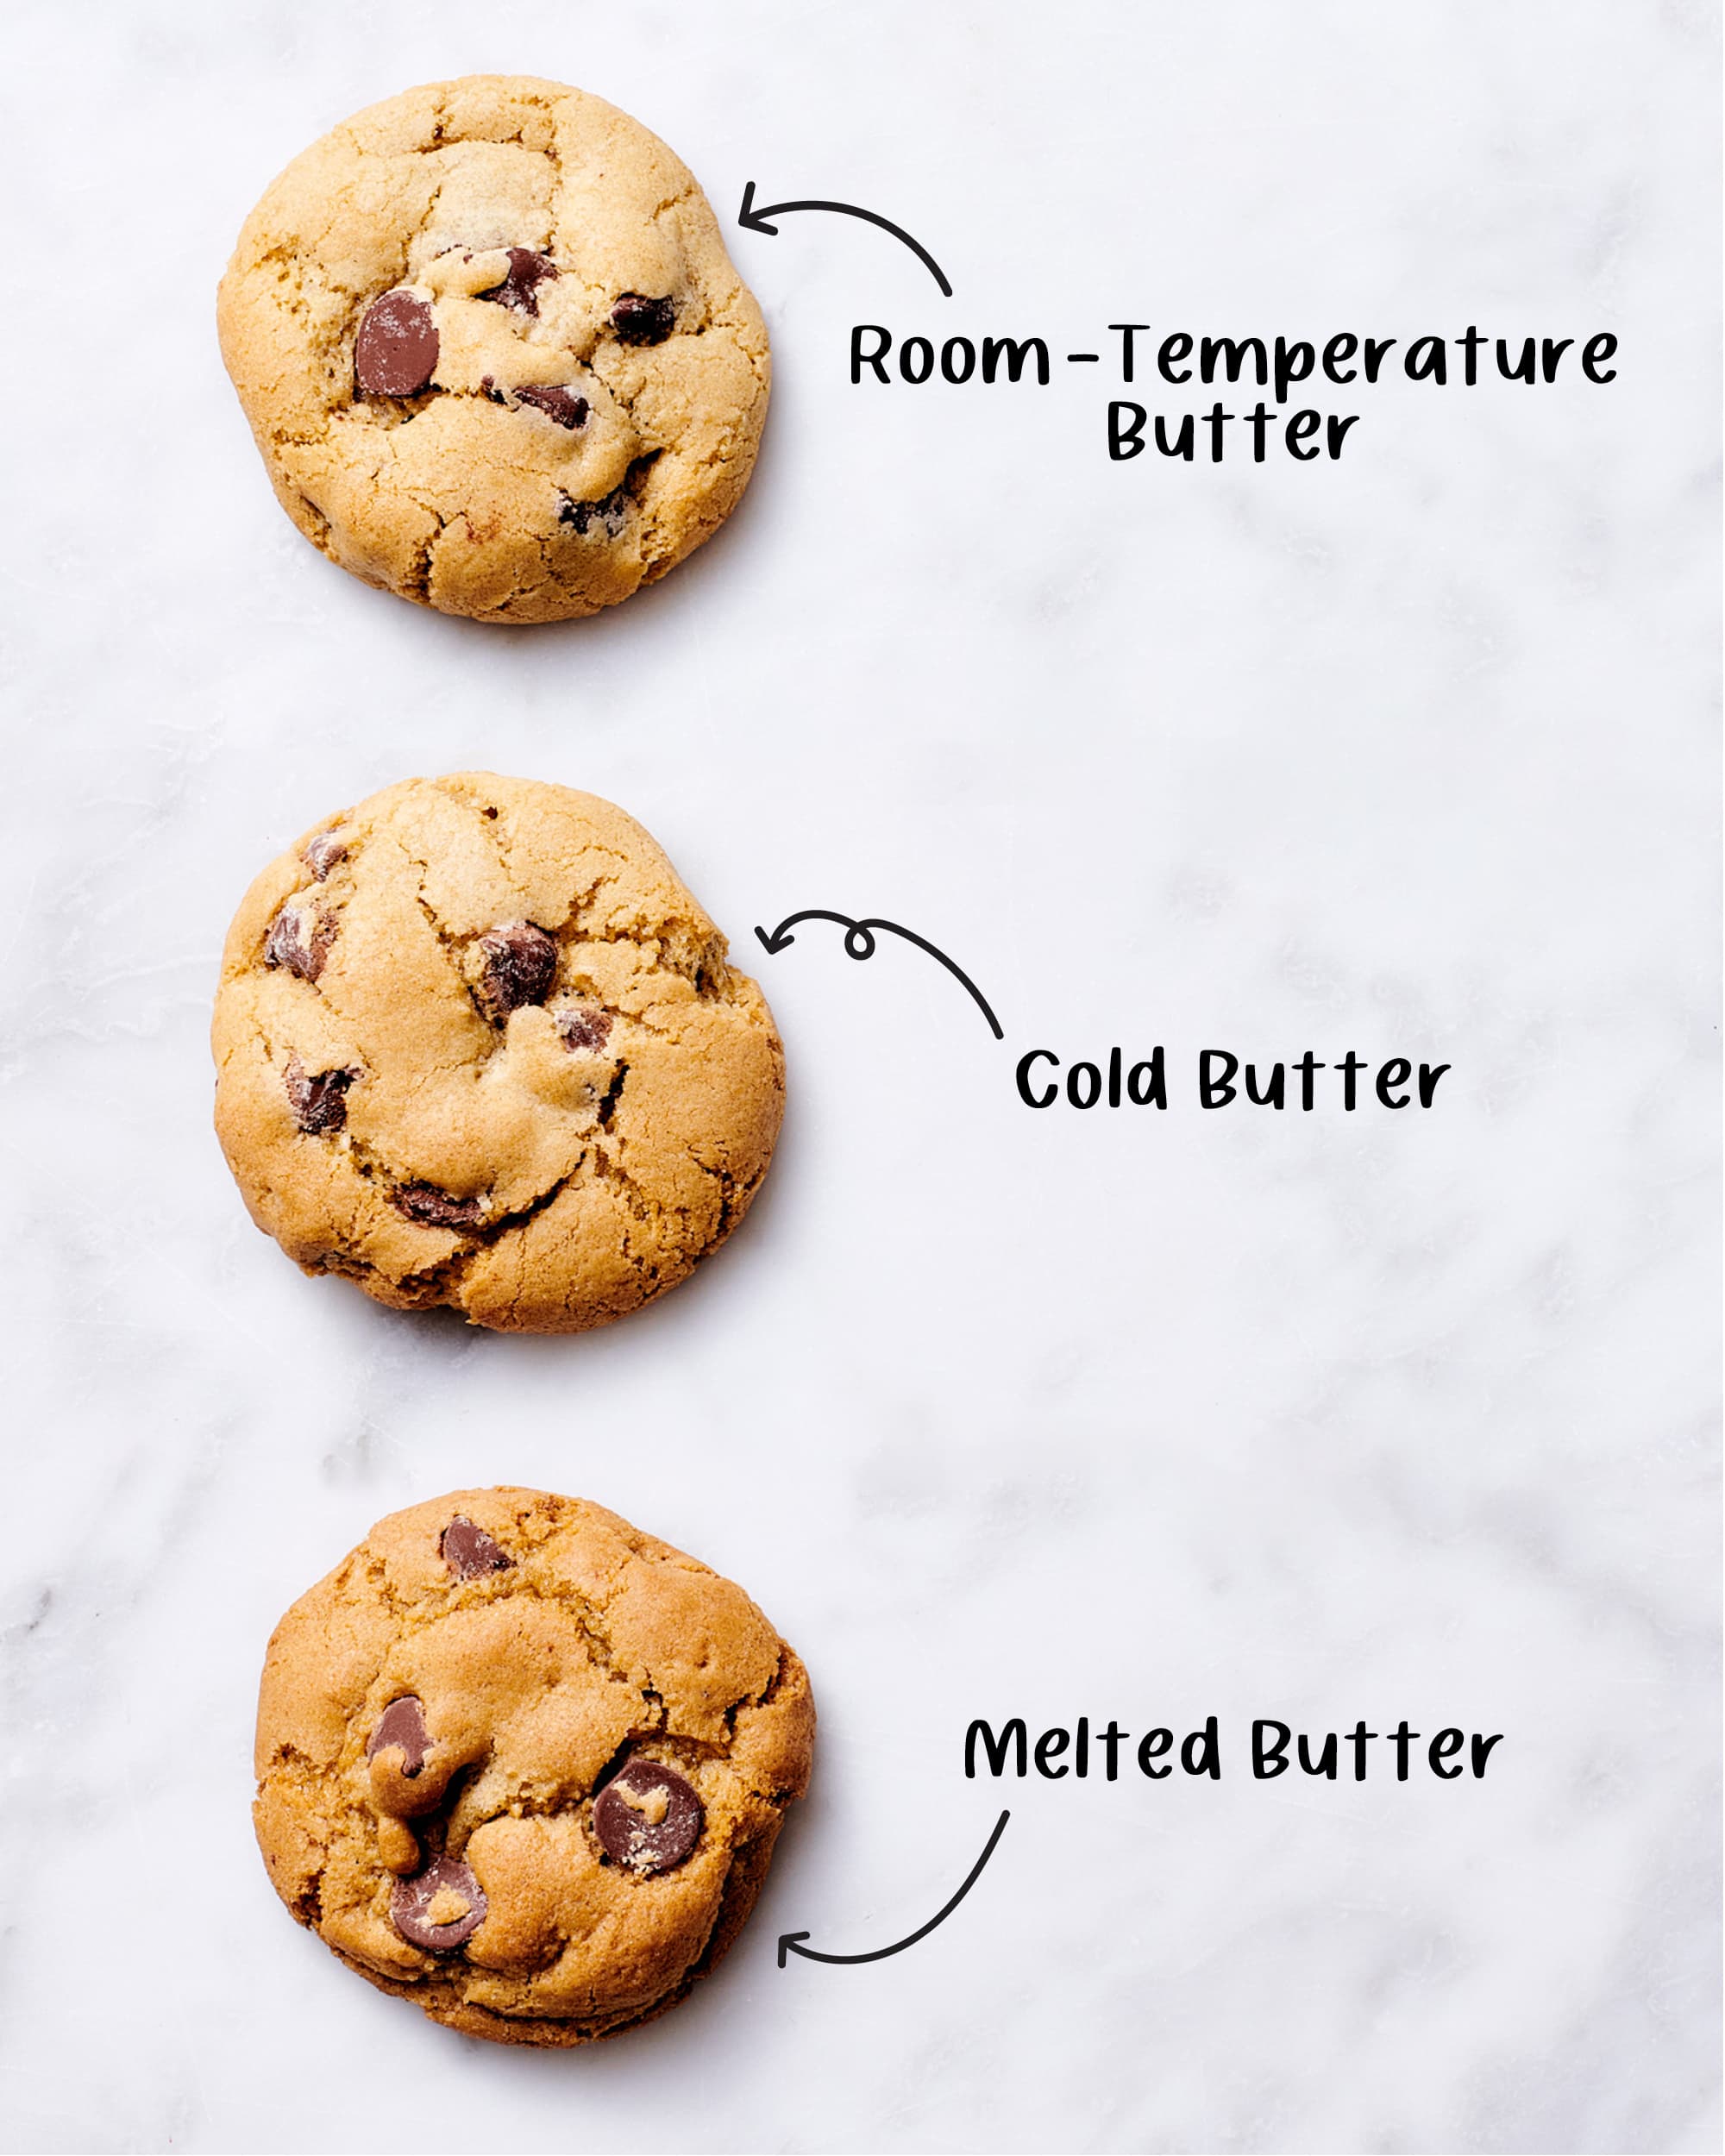 https://cdn.apartmenttherapy.info/image/upload/v1669847166/k/Design/2022-11/how-butter-temperature-affects-cookies/how-butter-temperature-affects-cookies.jpg